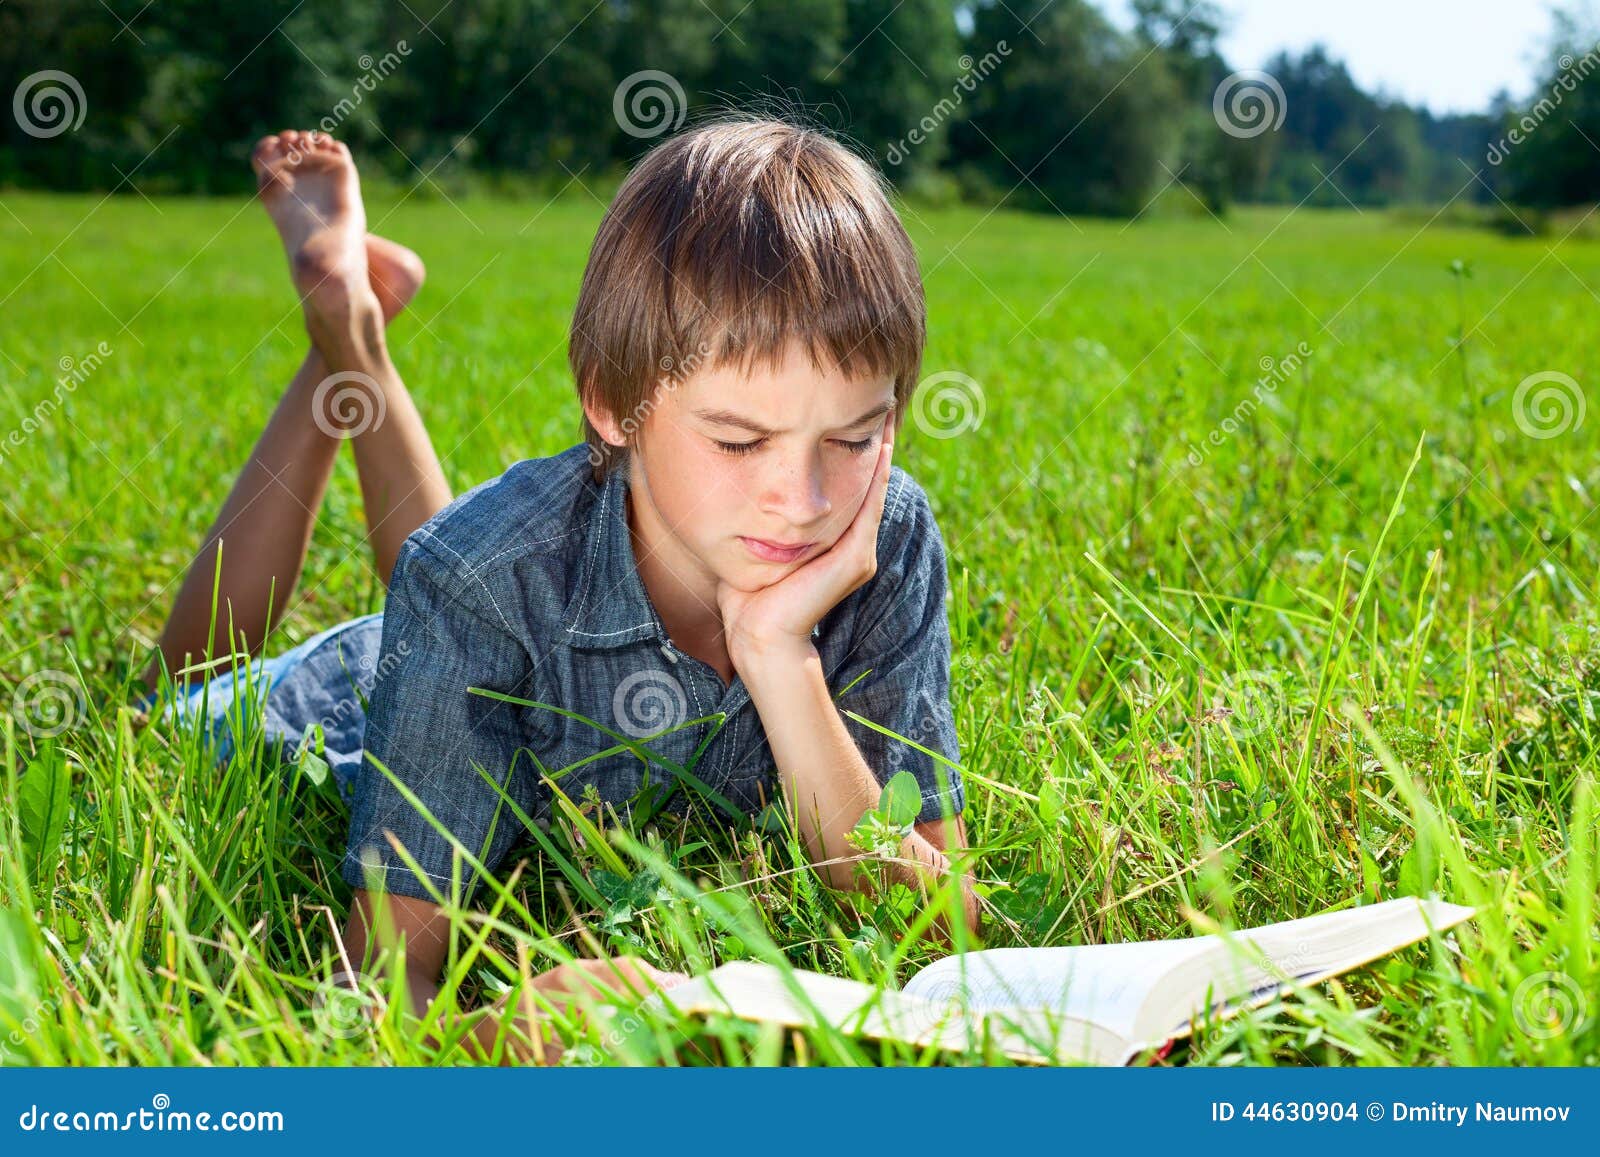 Child Reading Book Outdoor Stock Photo Image 44630904